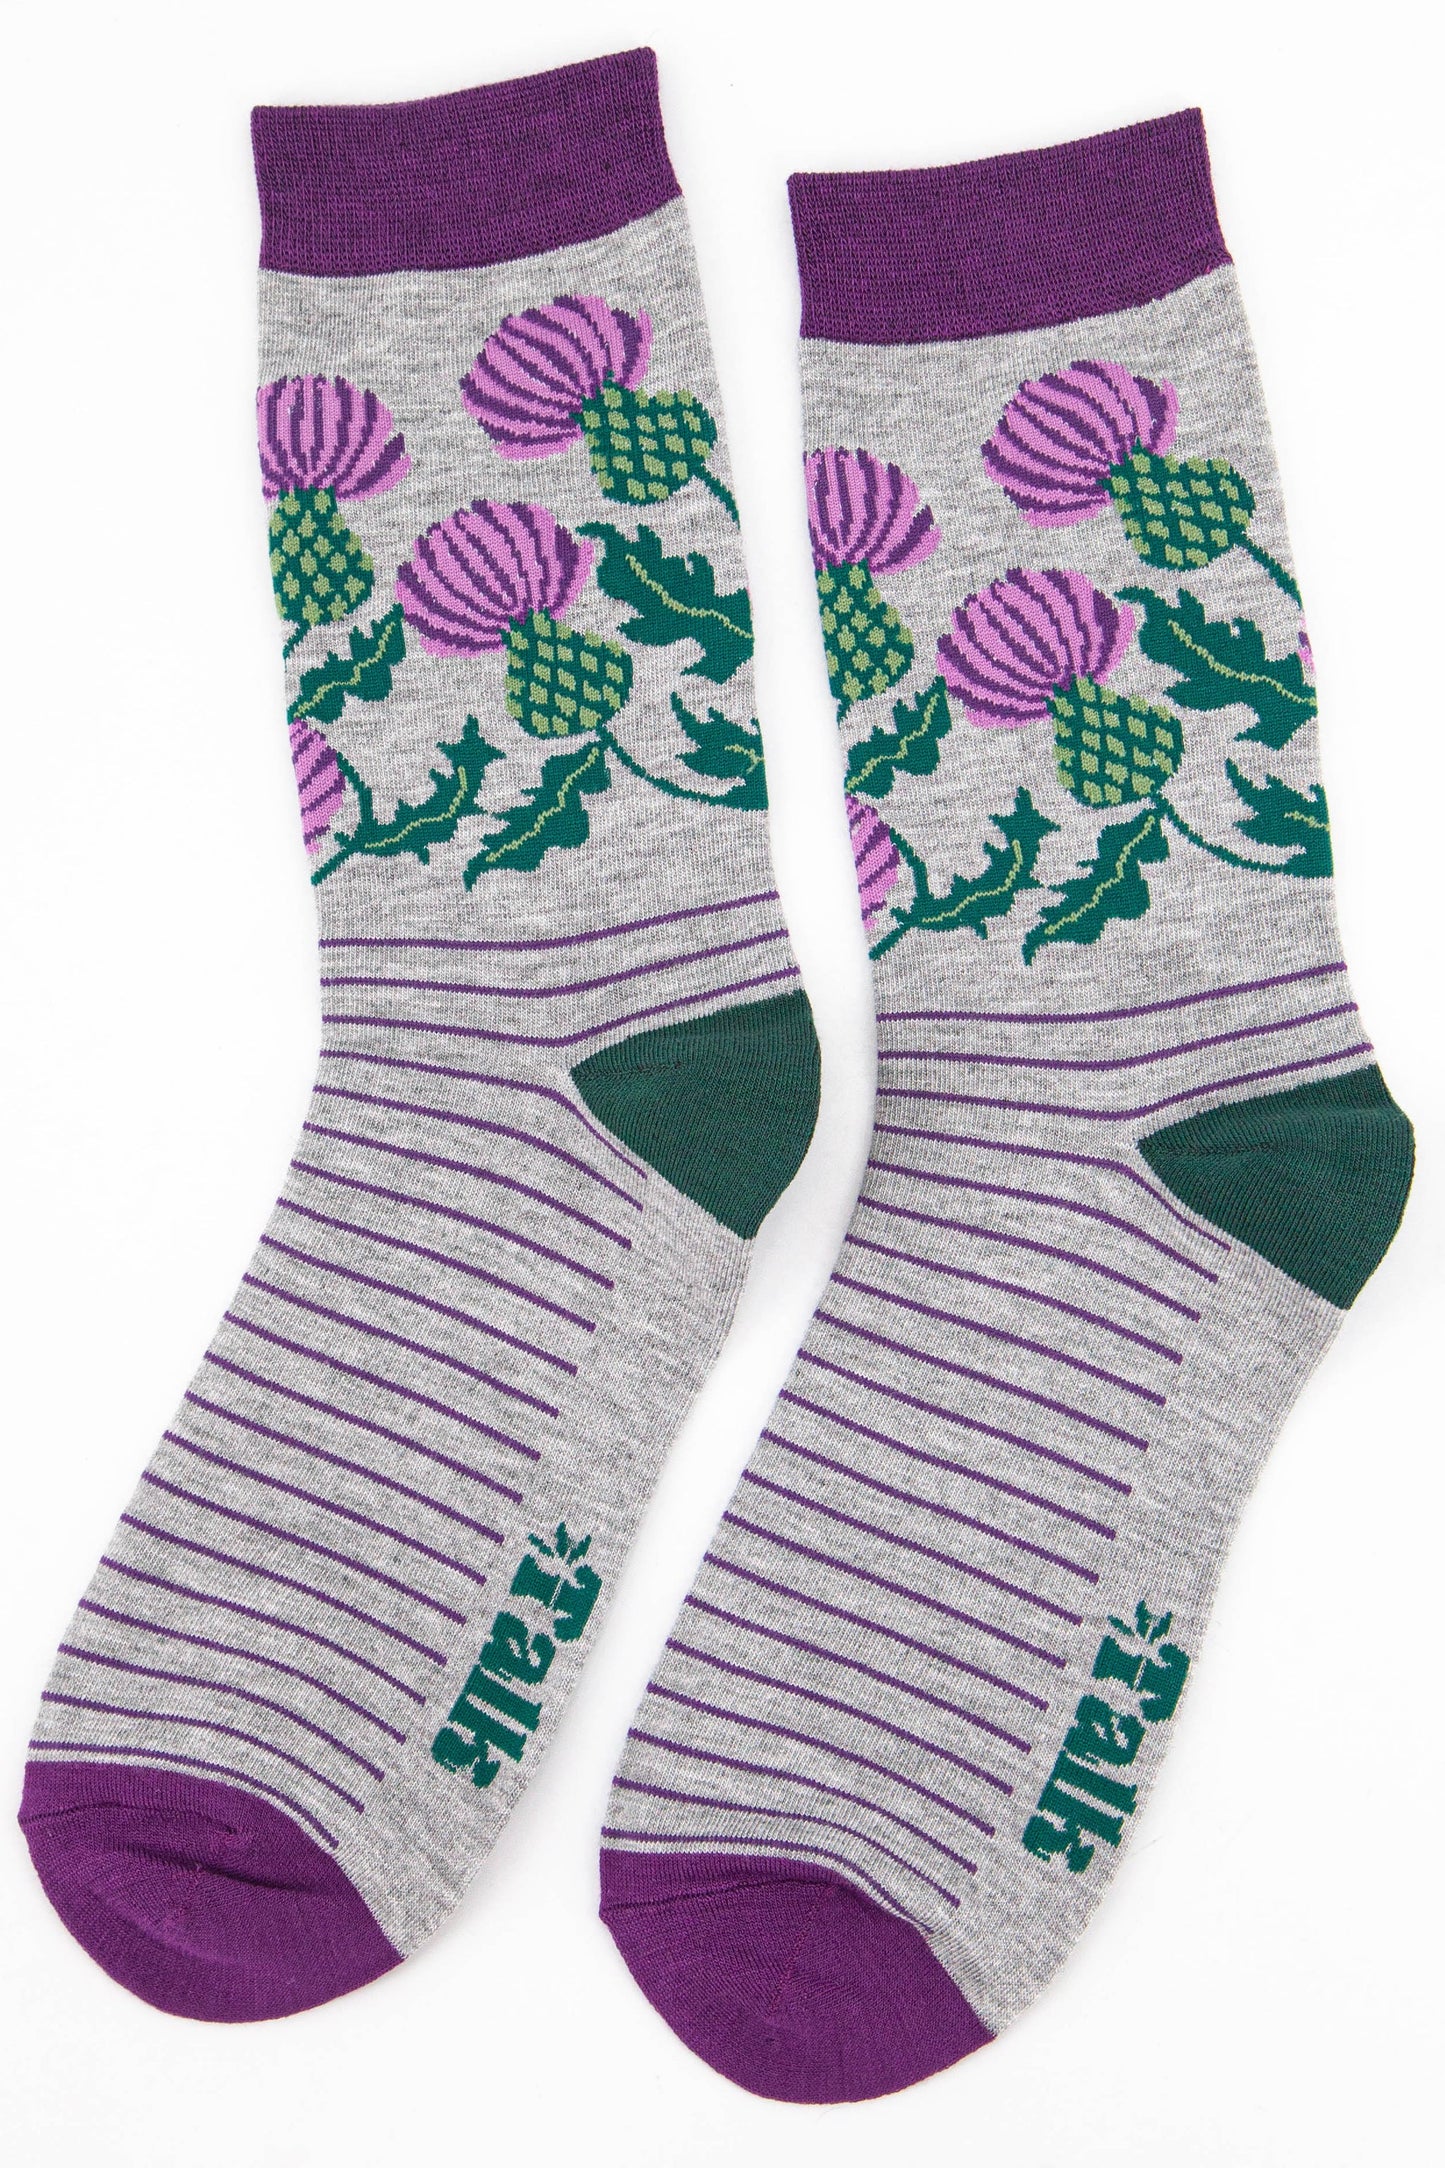 mens grey bamboo socks featuring a Scottish thistle design and purple stripes